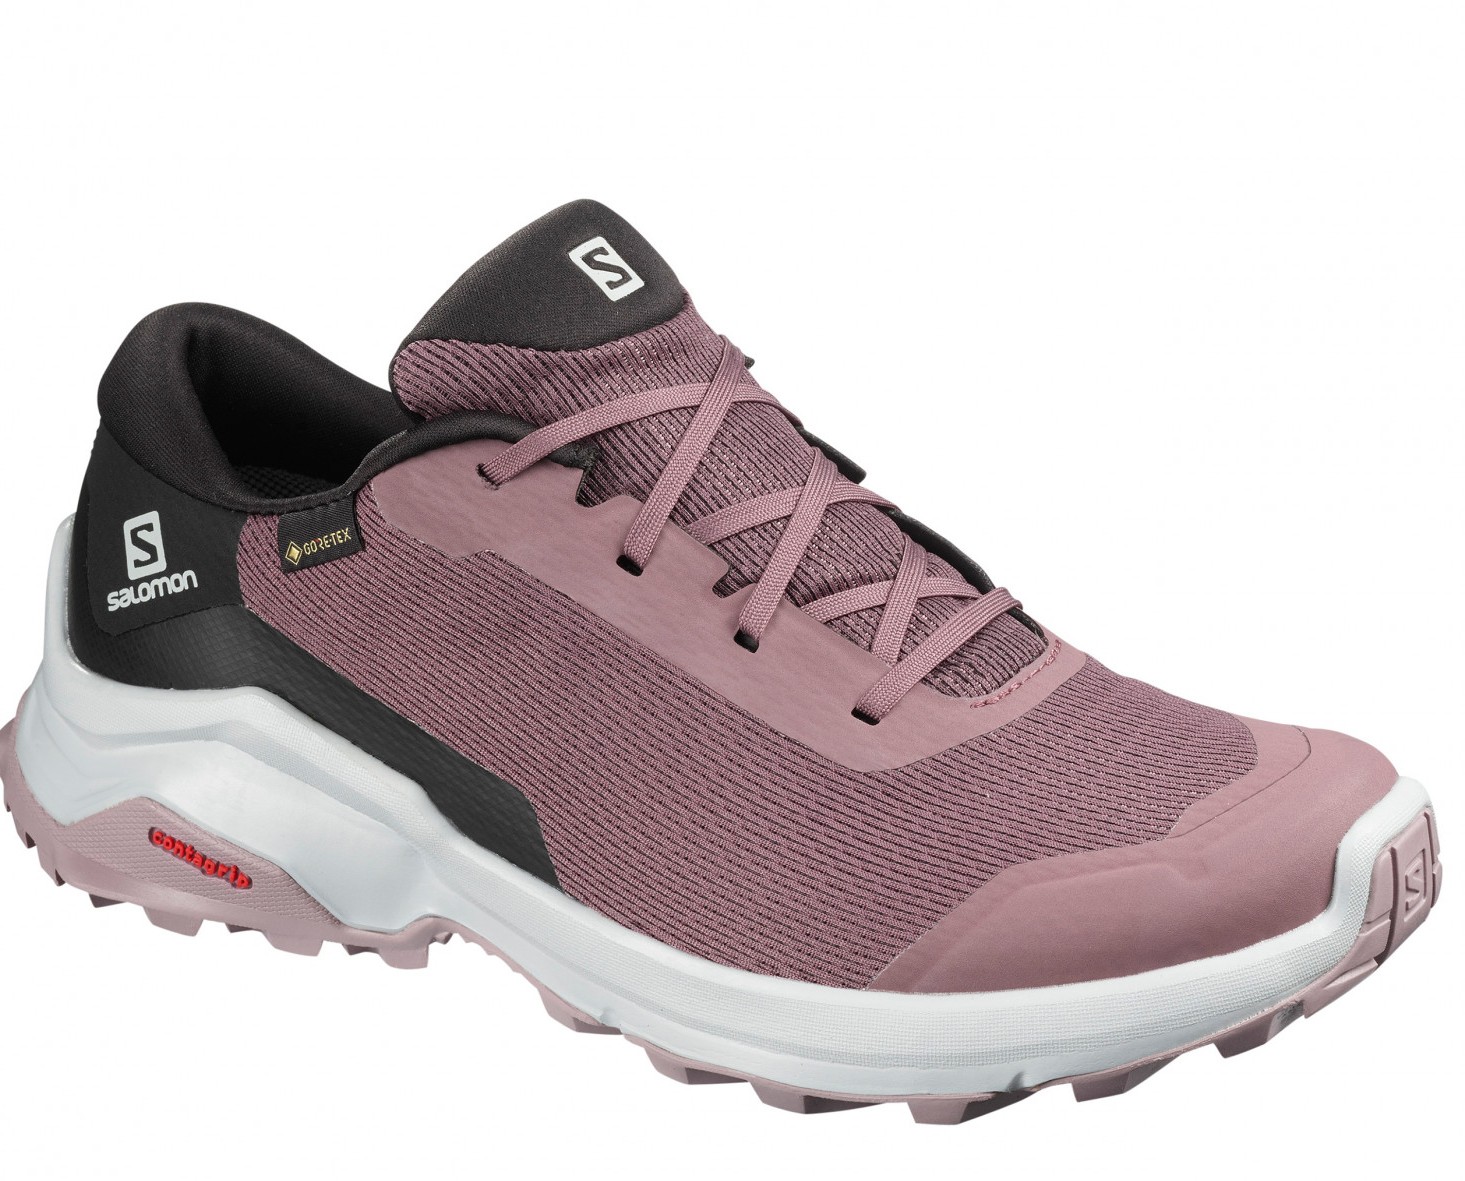 Top-rated Salomon walking shoes are a 